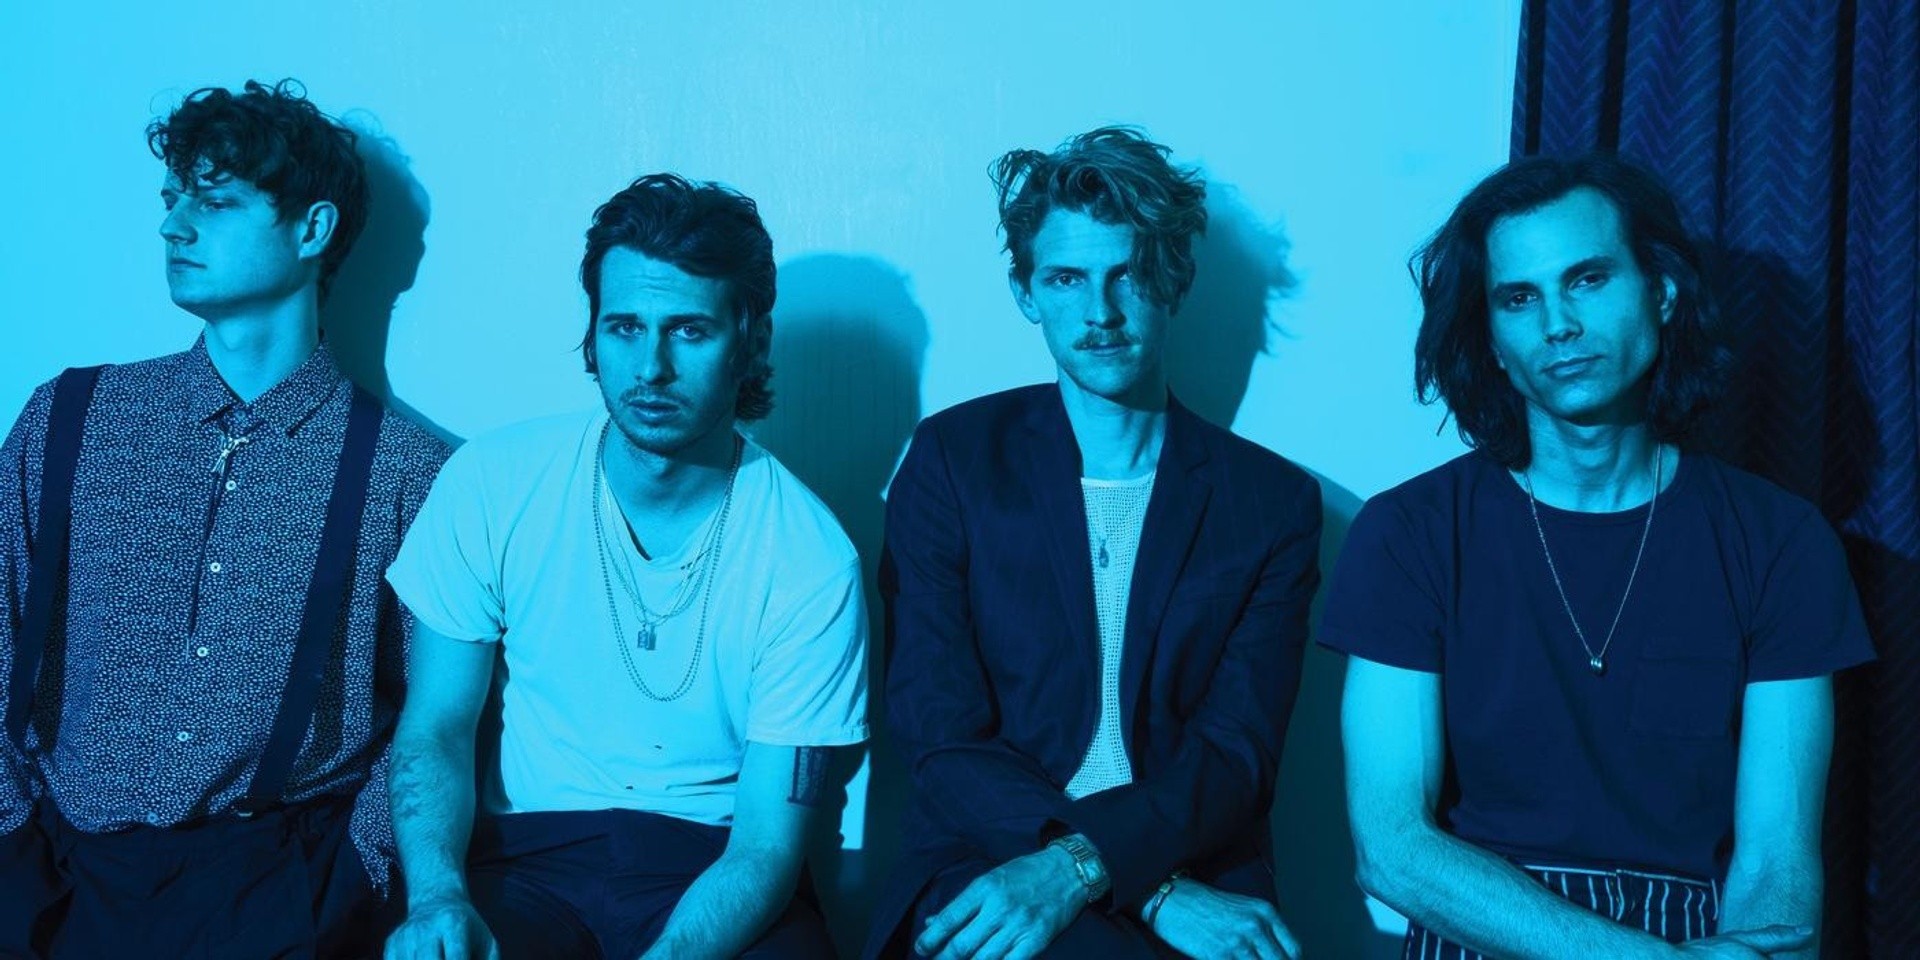 Foster The People: "The new record takes its true form when it's performed live"